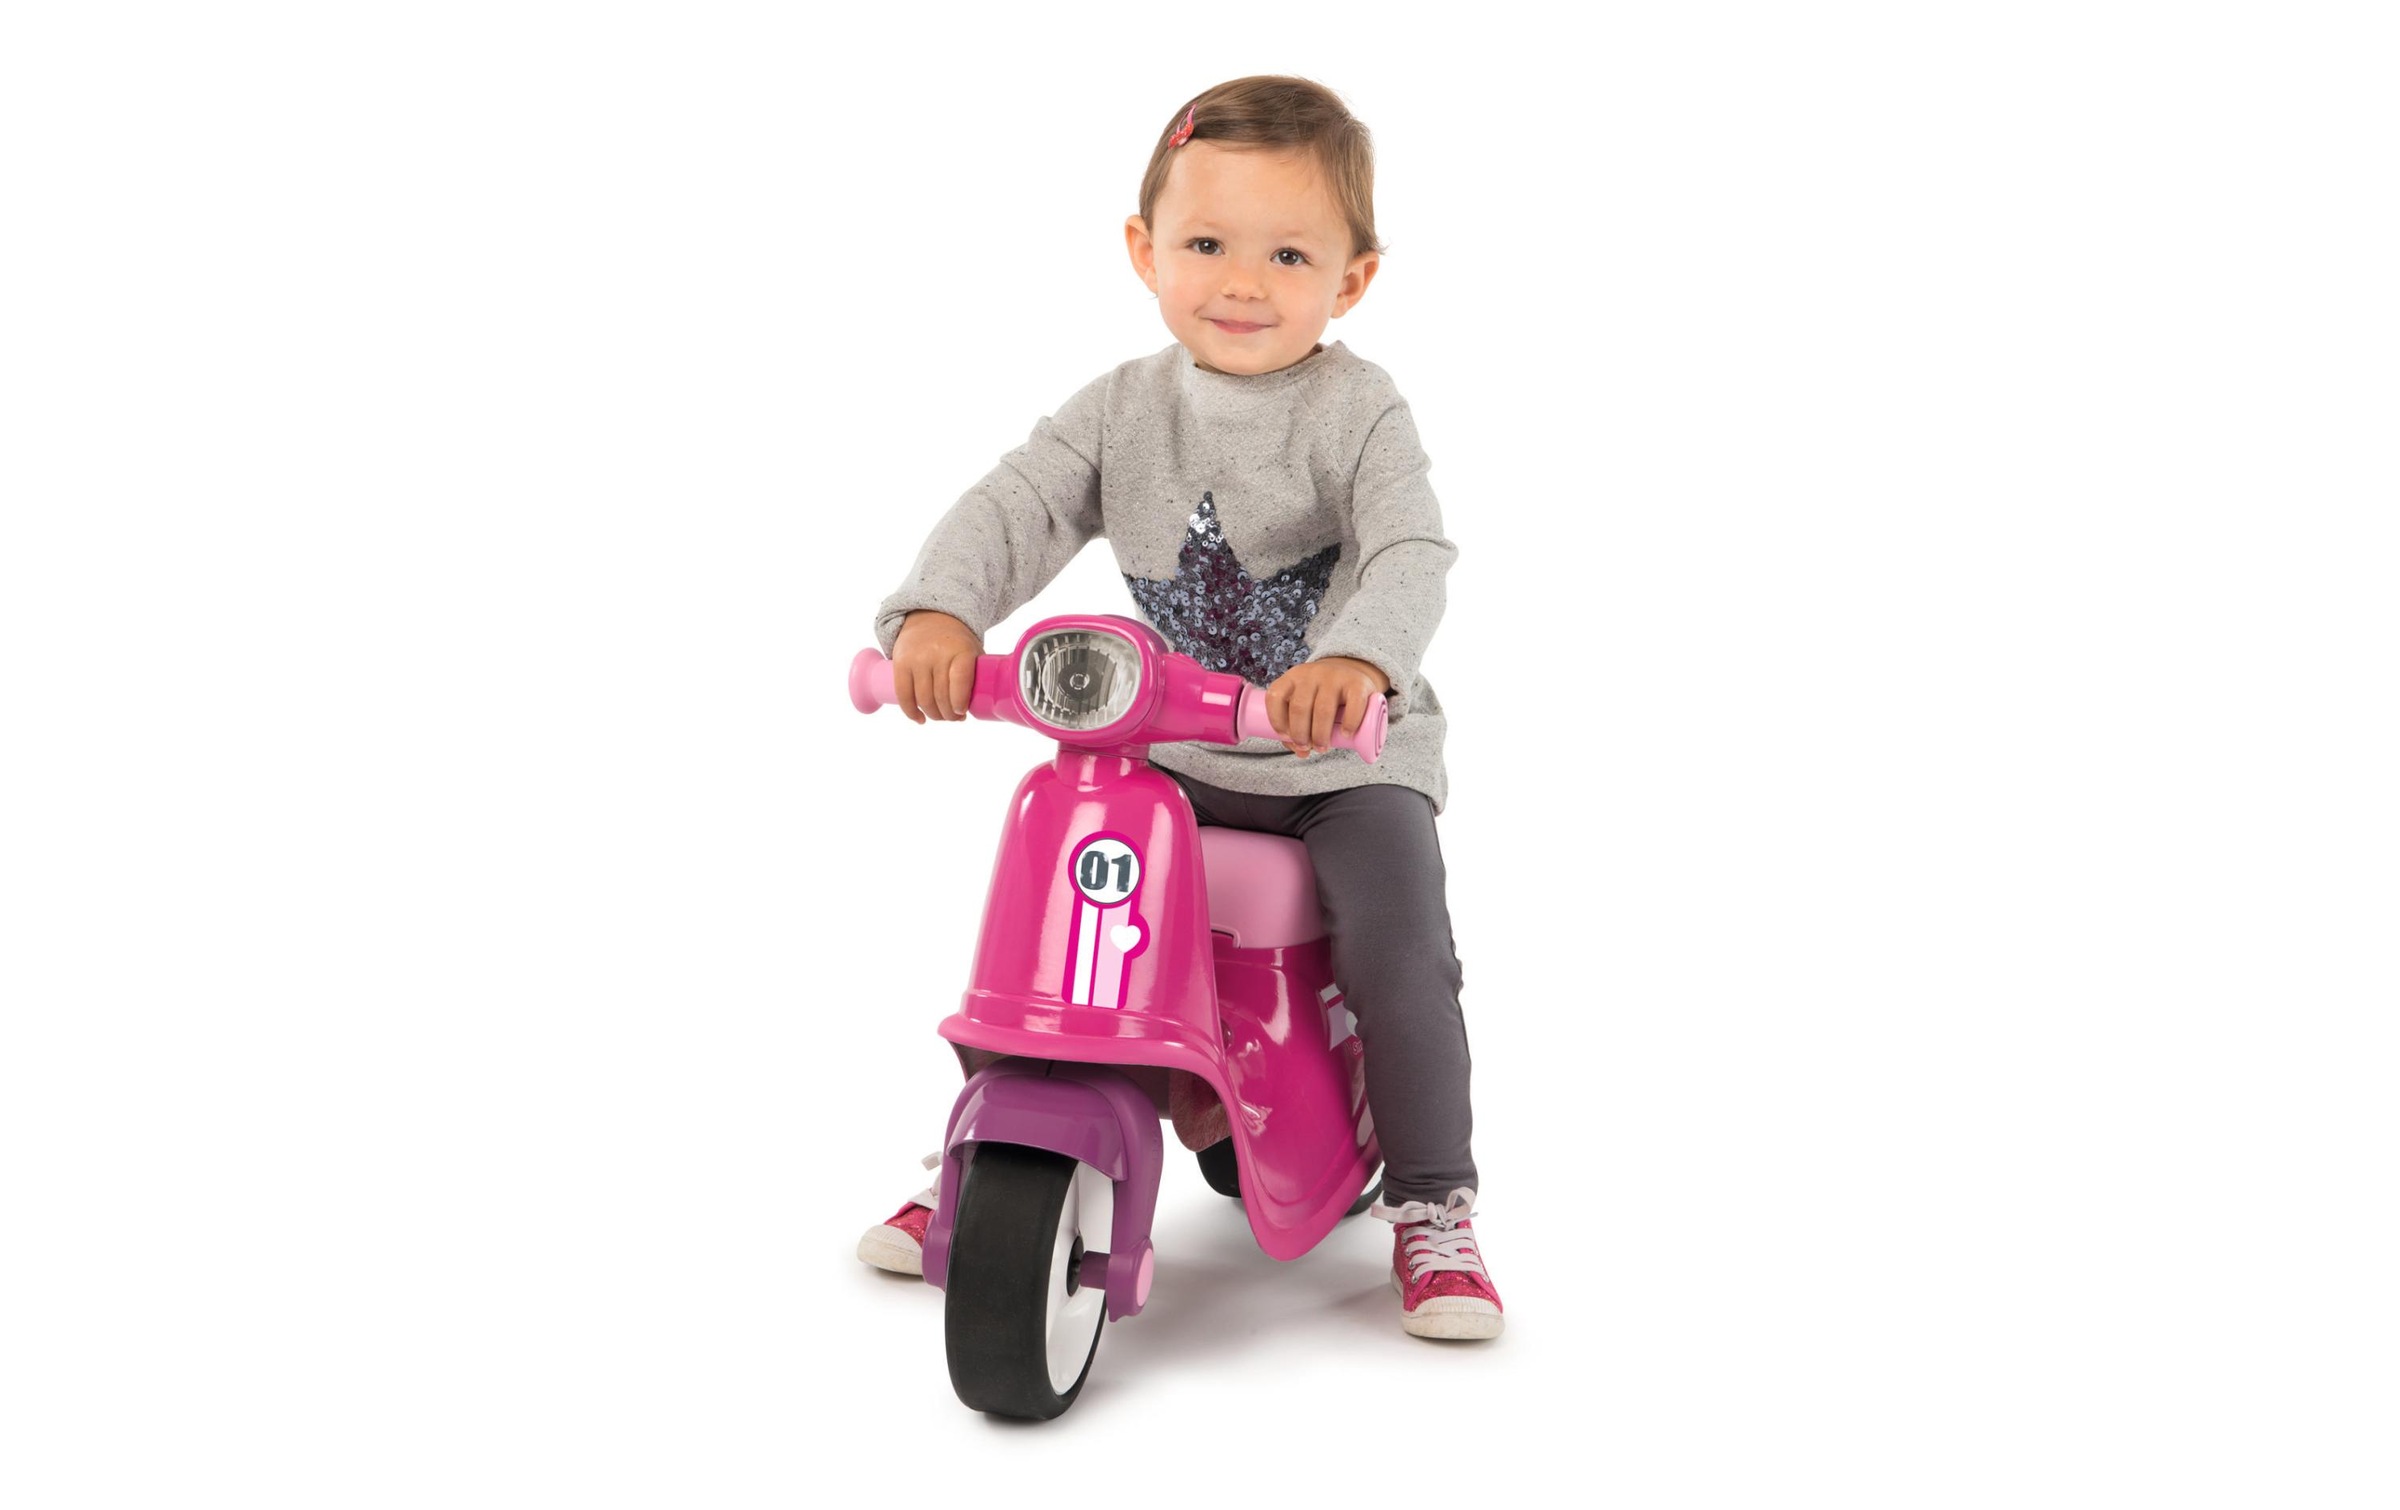 Smoby Rutscher »Scooter Ride-on pink«